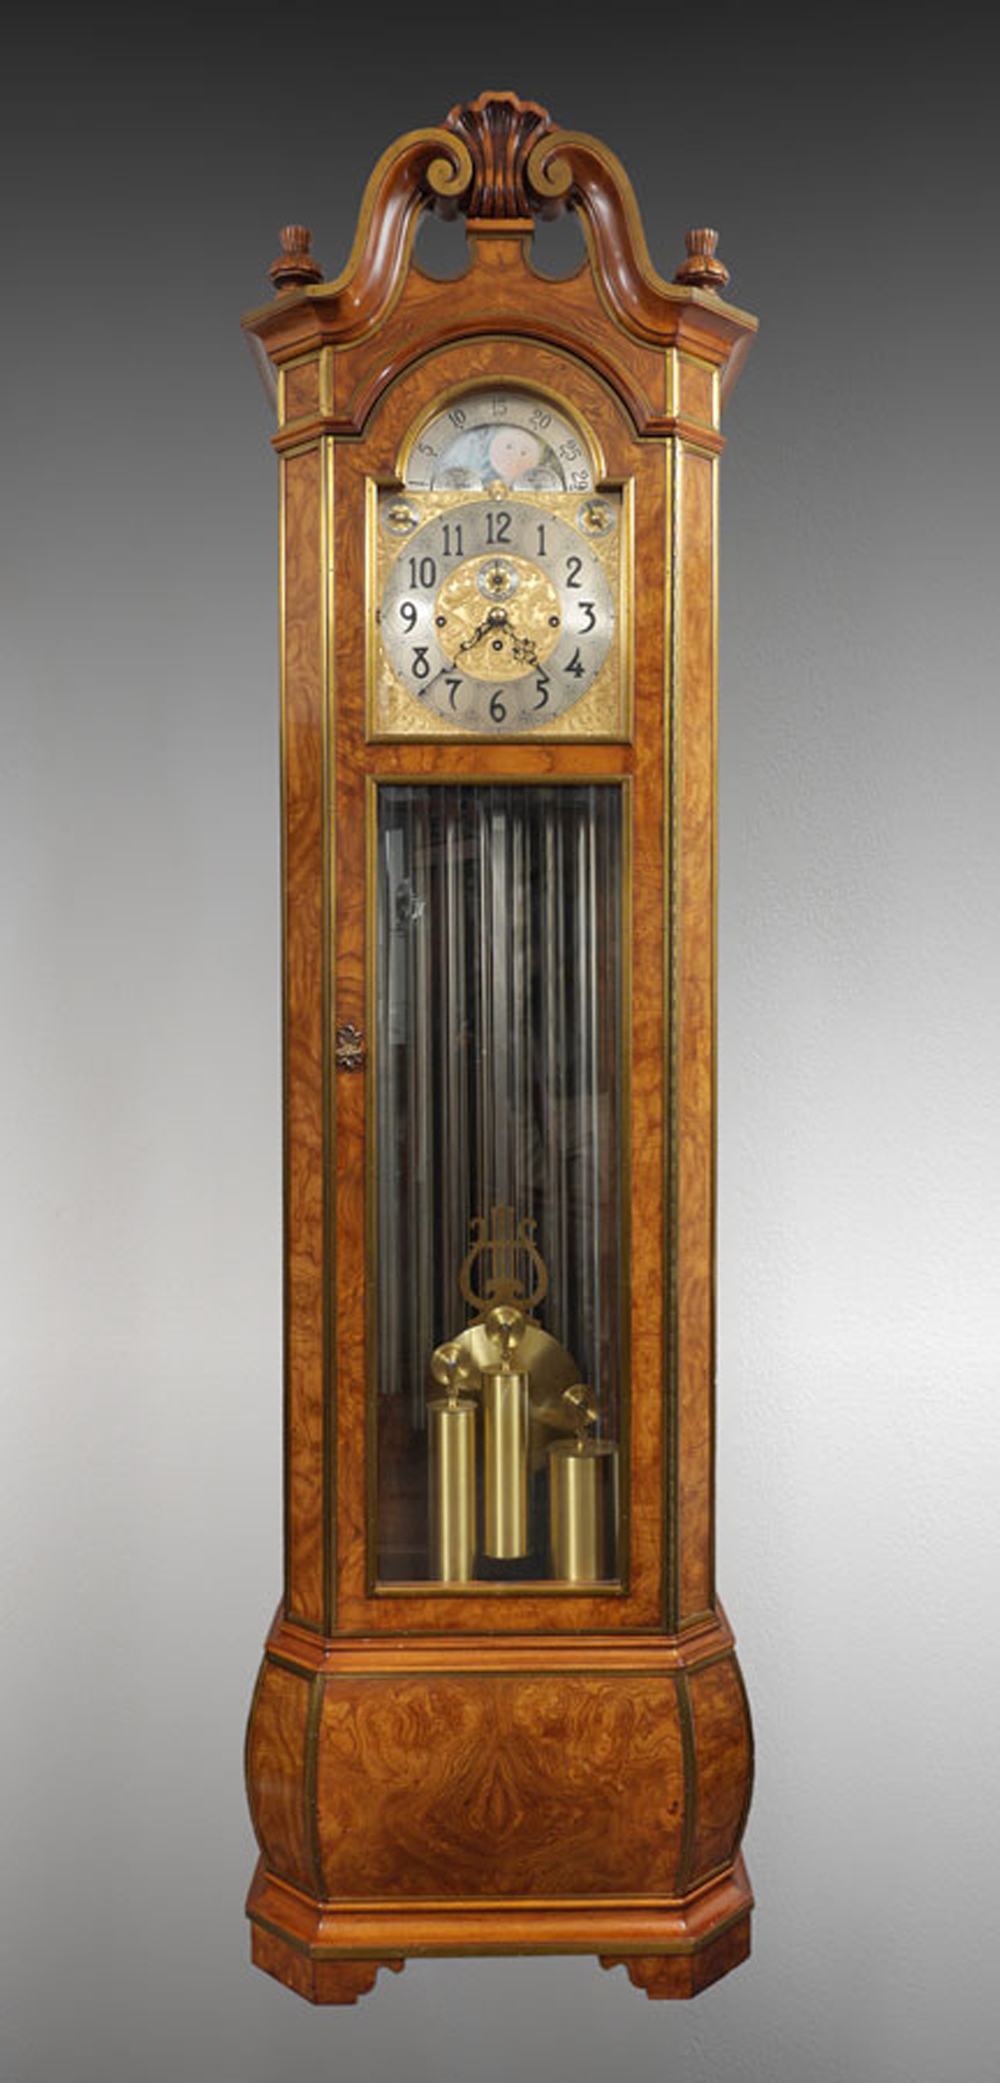 HERSCHEDES 9 TUBE GRANDFATHER CLOCK: